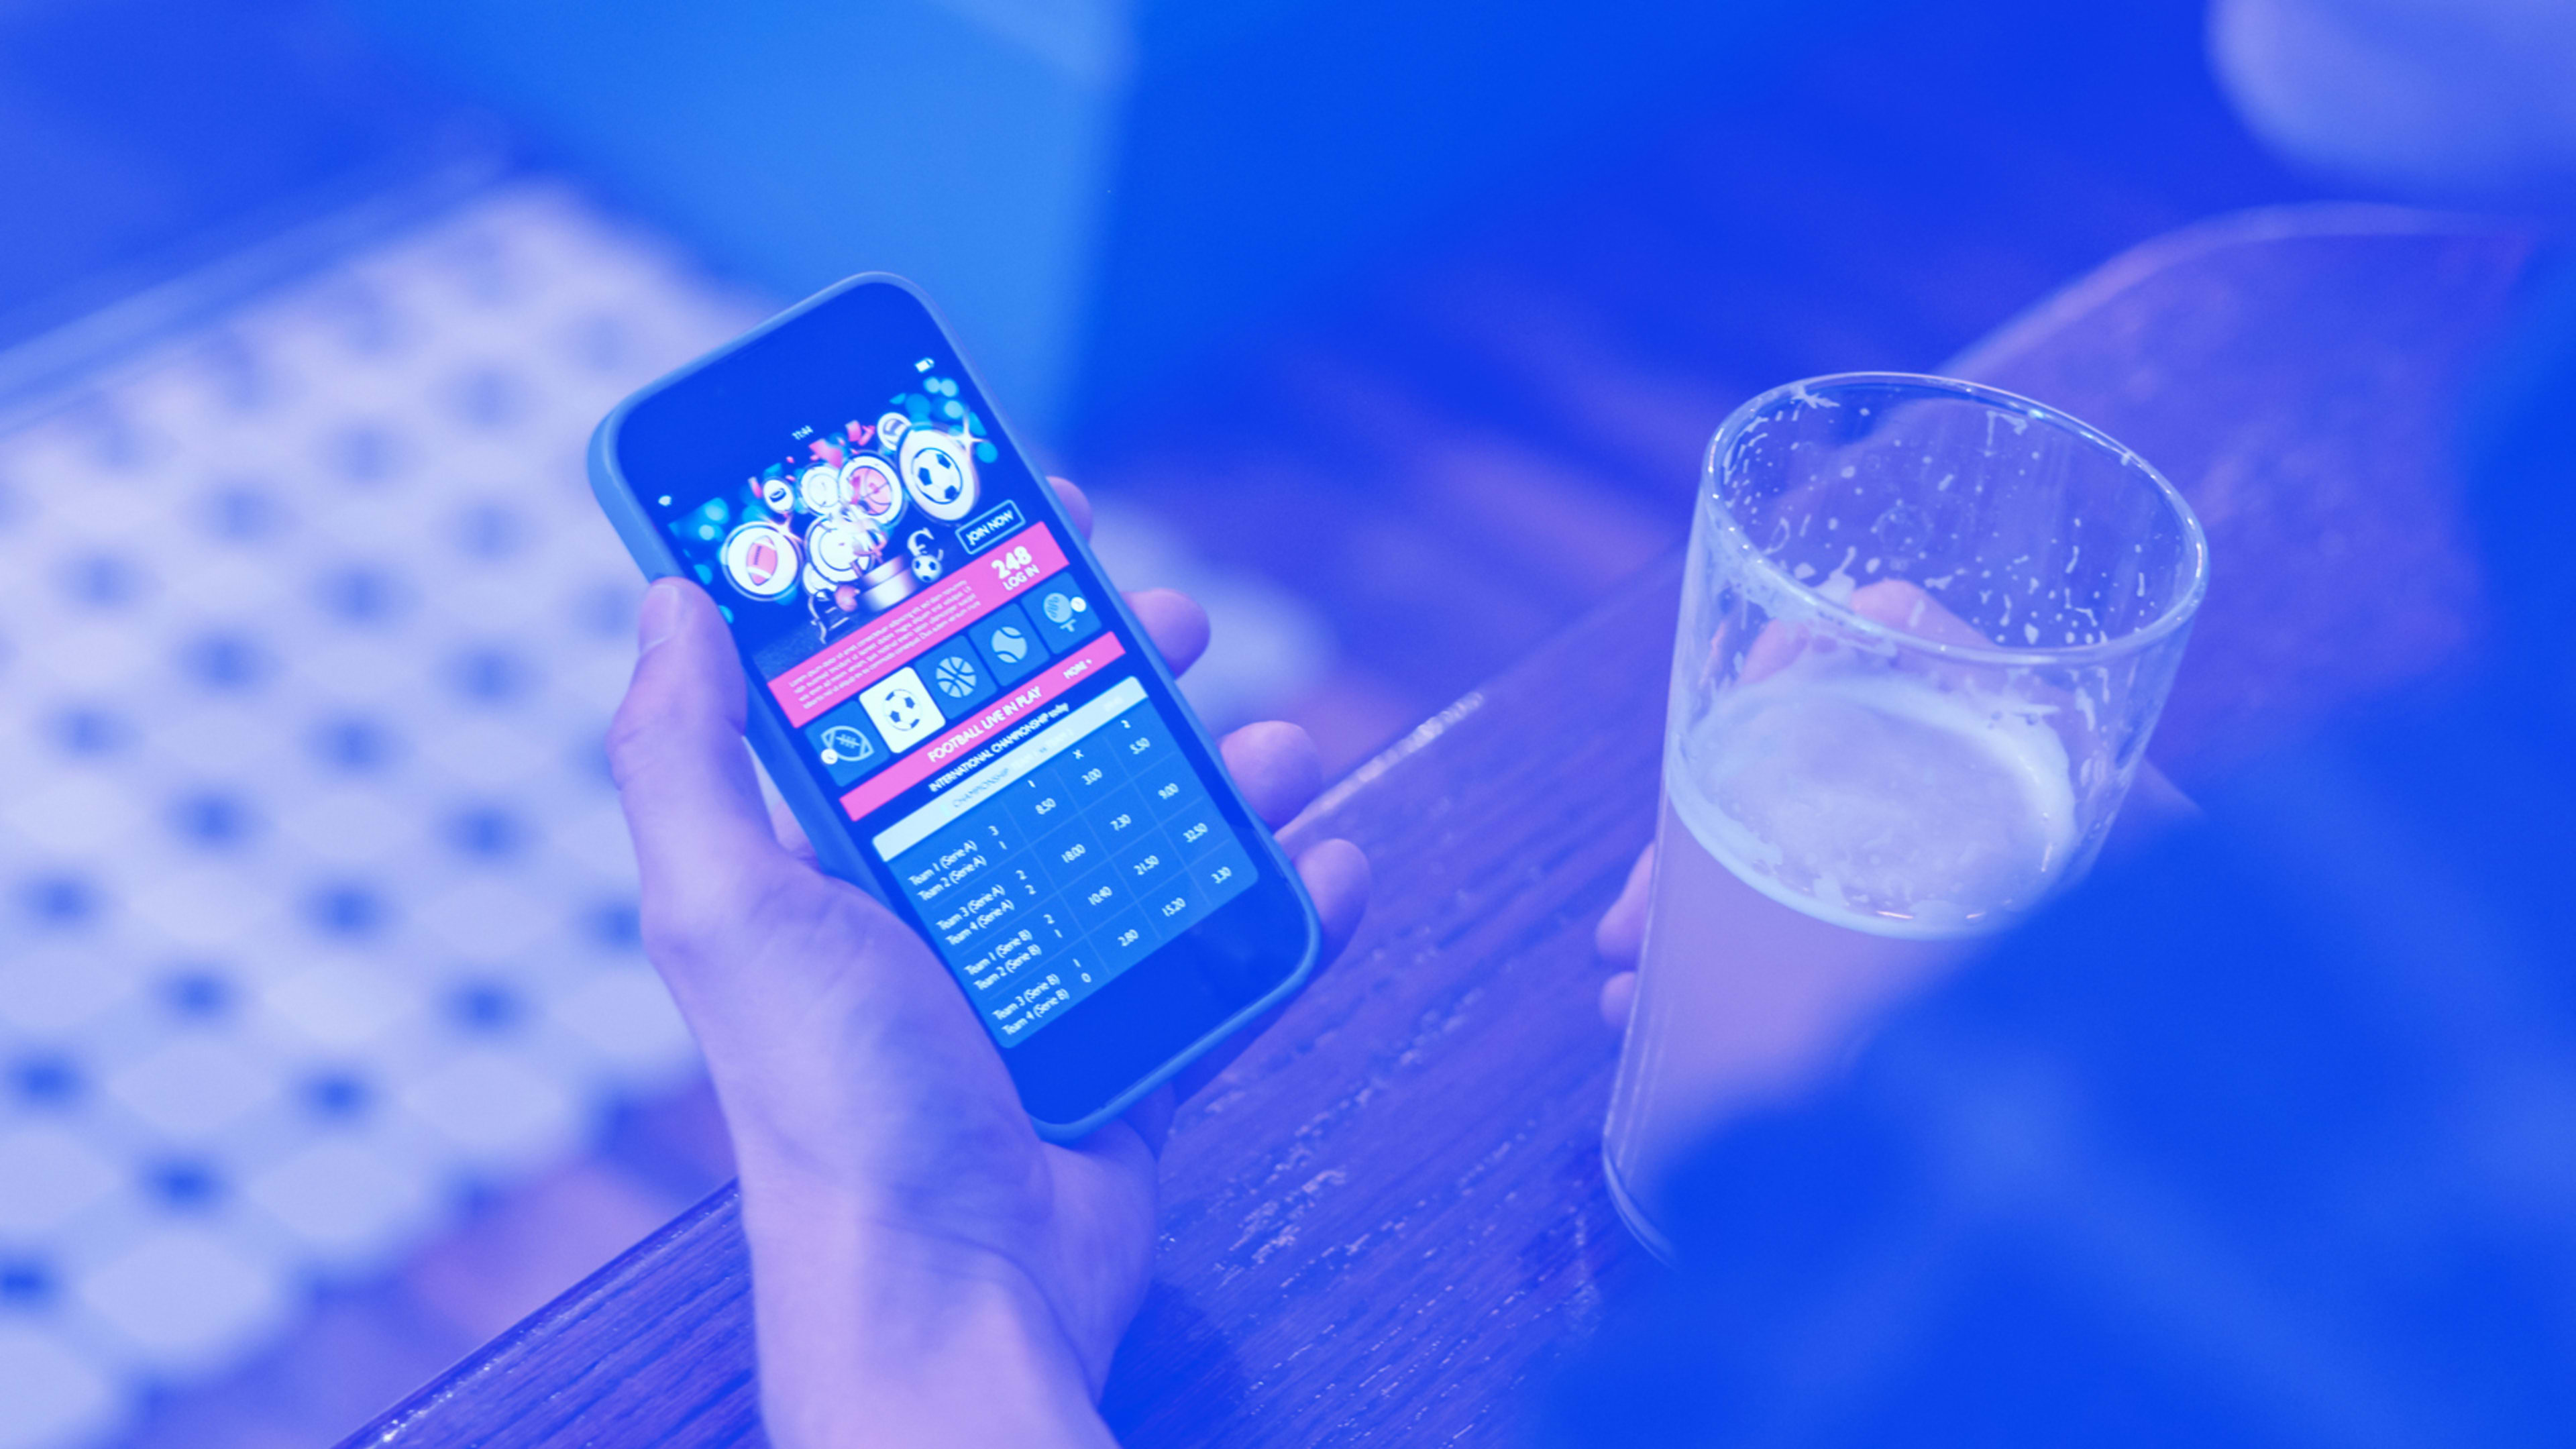 A psychologist explains why some people get hooked on sports betting apps